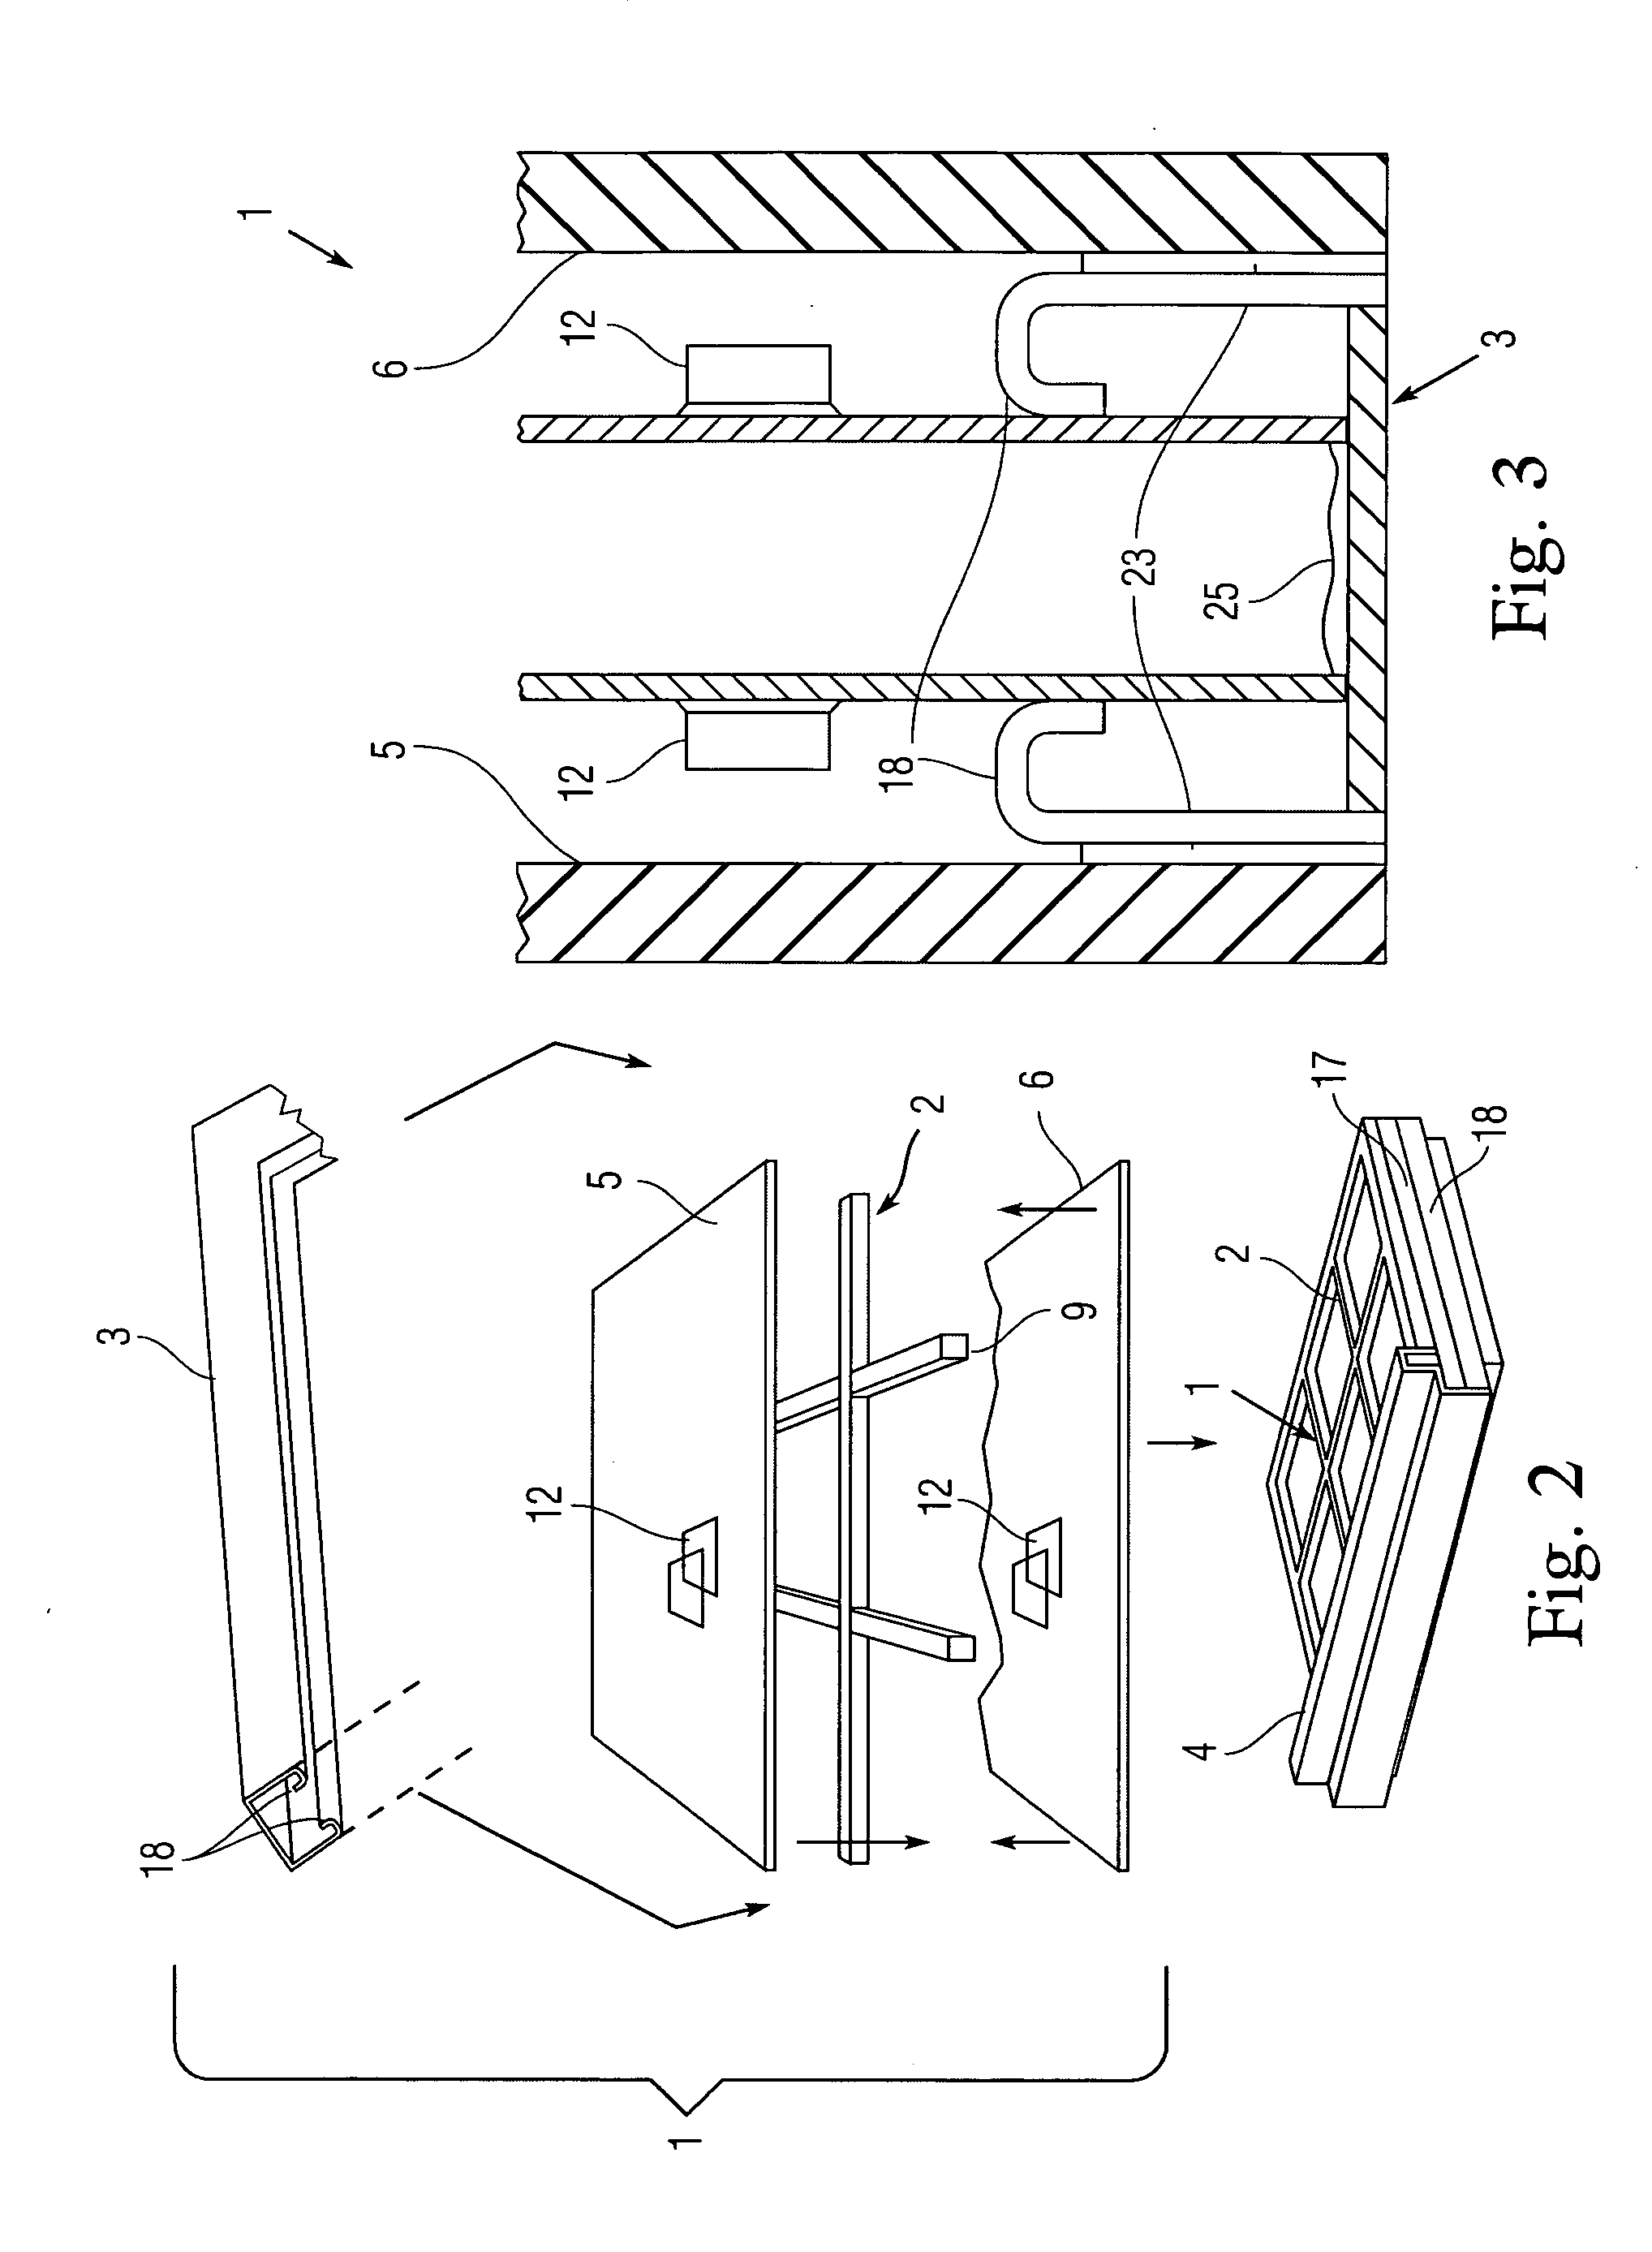 Security window insert assembly